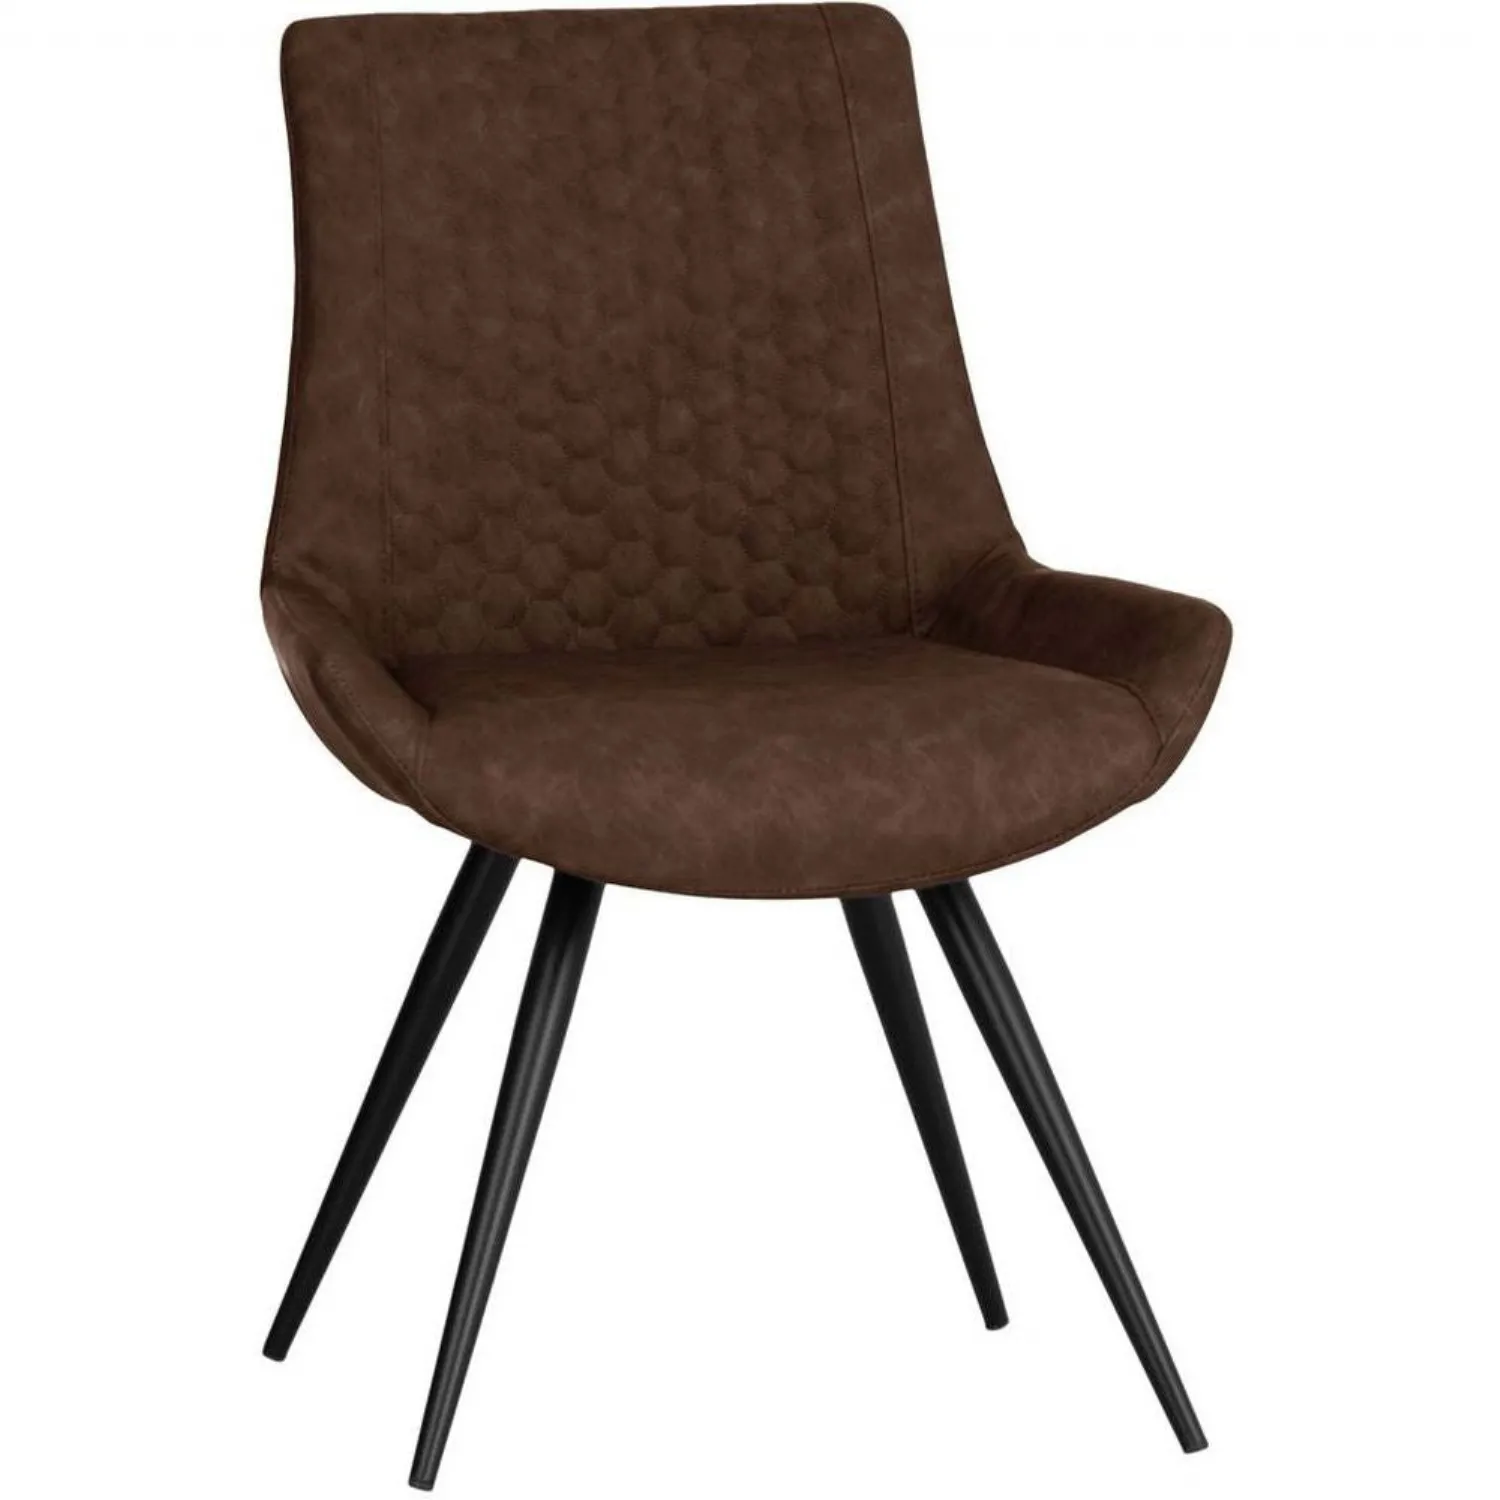 The Chair Collection Honeycomb Stitch Dining